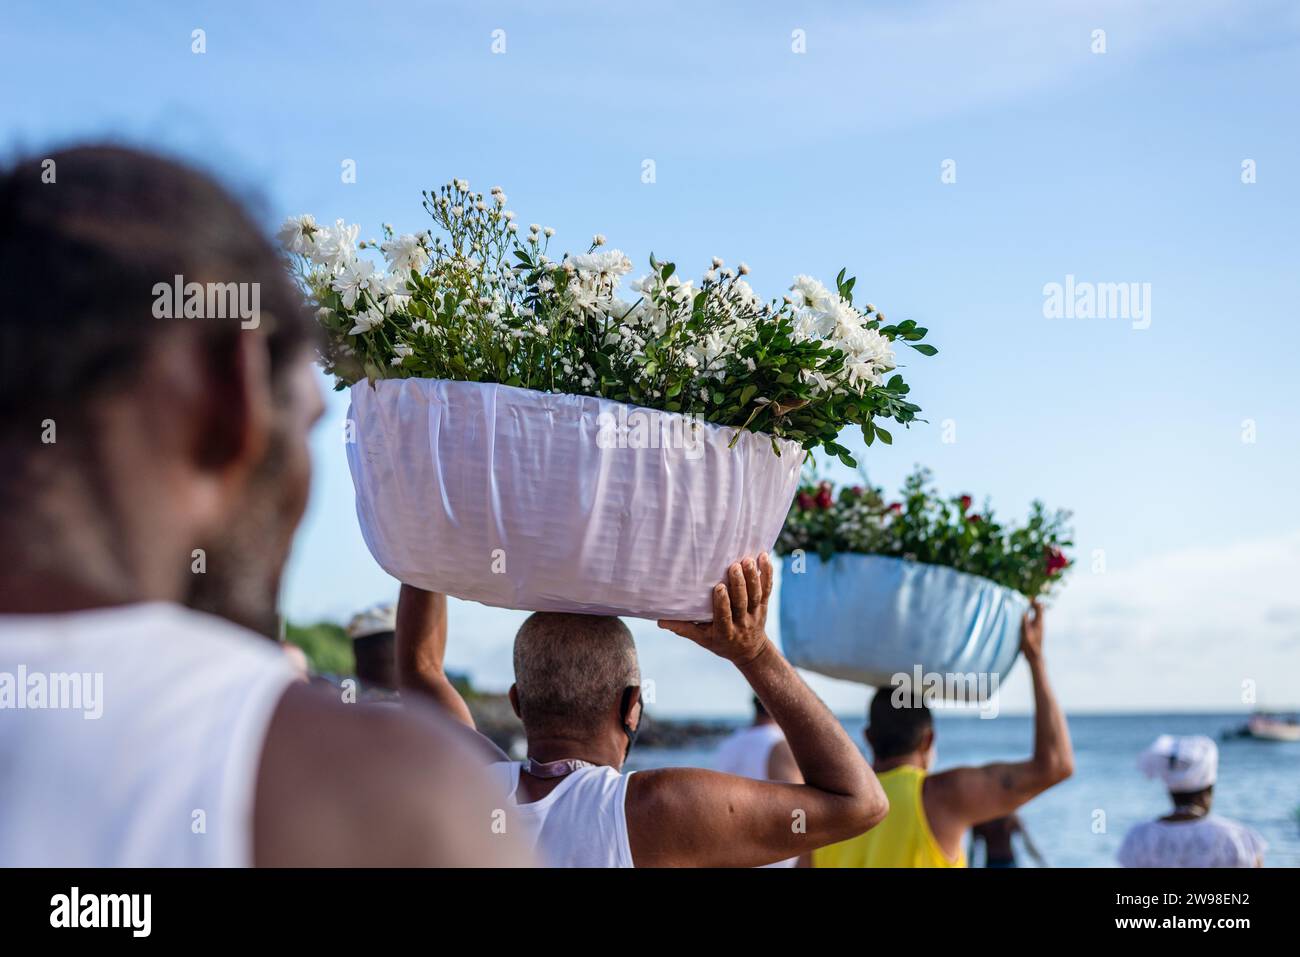 Salvador, Bahia, Brazil - January 30, 2022: Gifts for iemanja are taken to the sea by fishermen in the city of Salvador, Bahia. Stock Photo